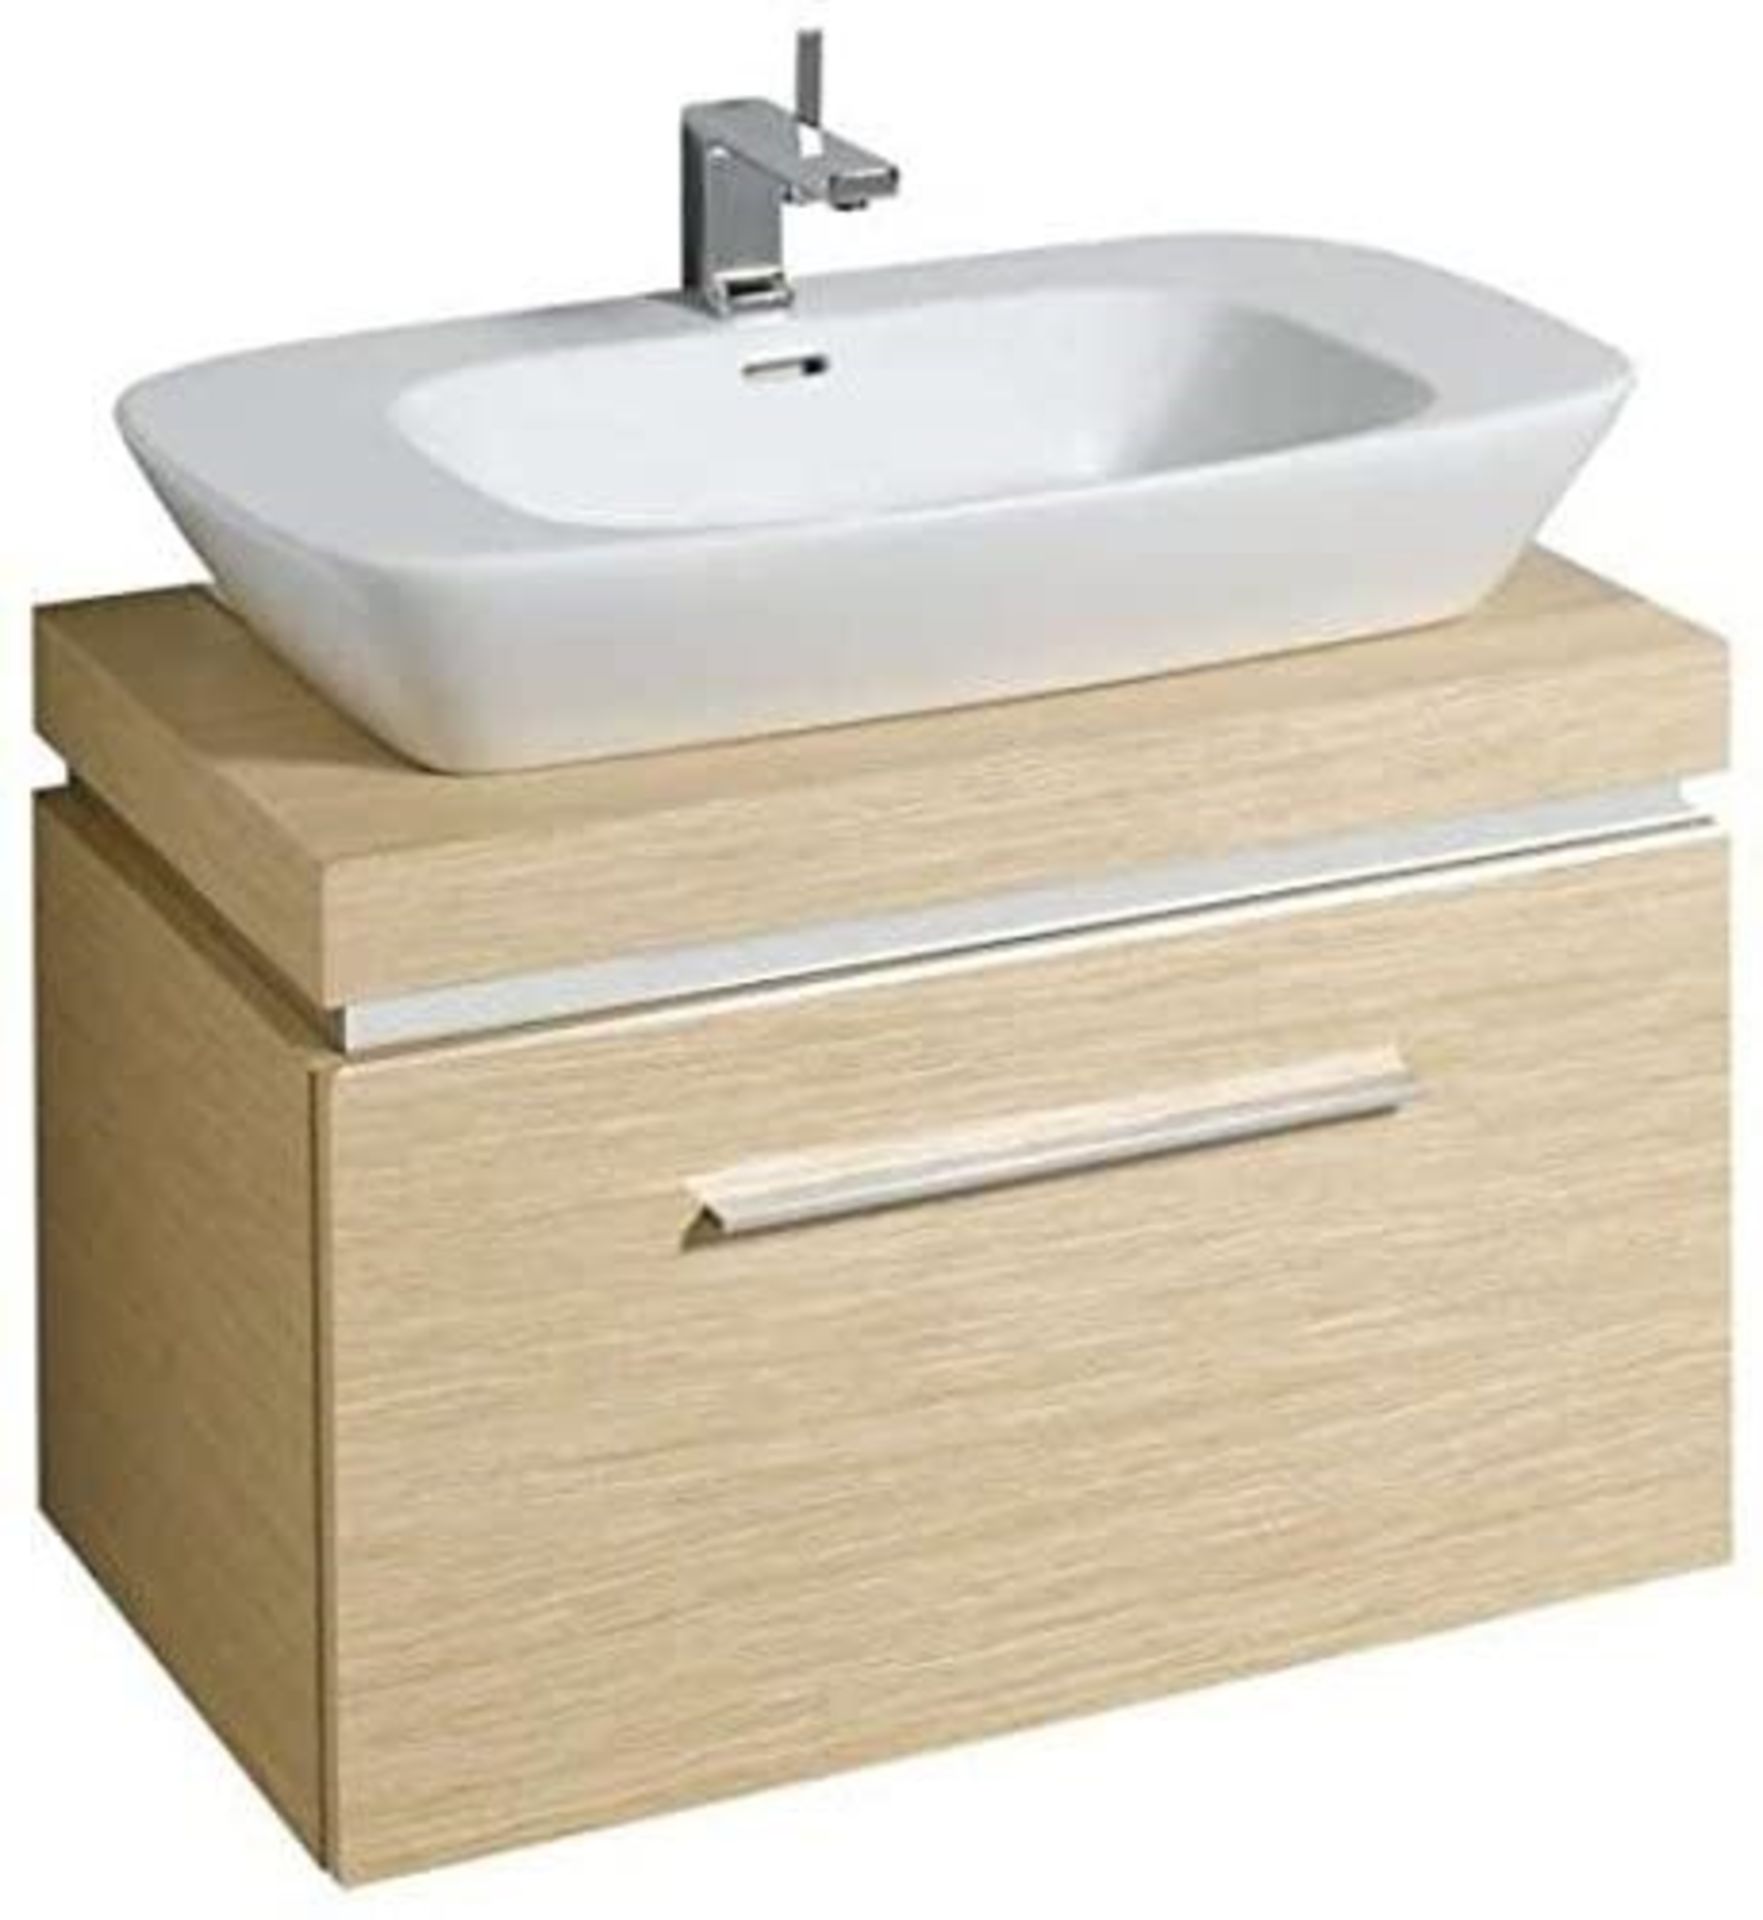 (Tl34) Keramag 800mm Oak White Vanity Unit.RRP £1,185.99.Comes Complete With Basin. ... (Tl34)